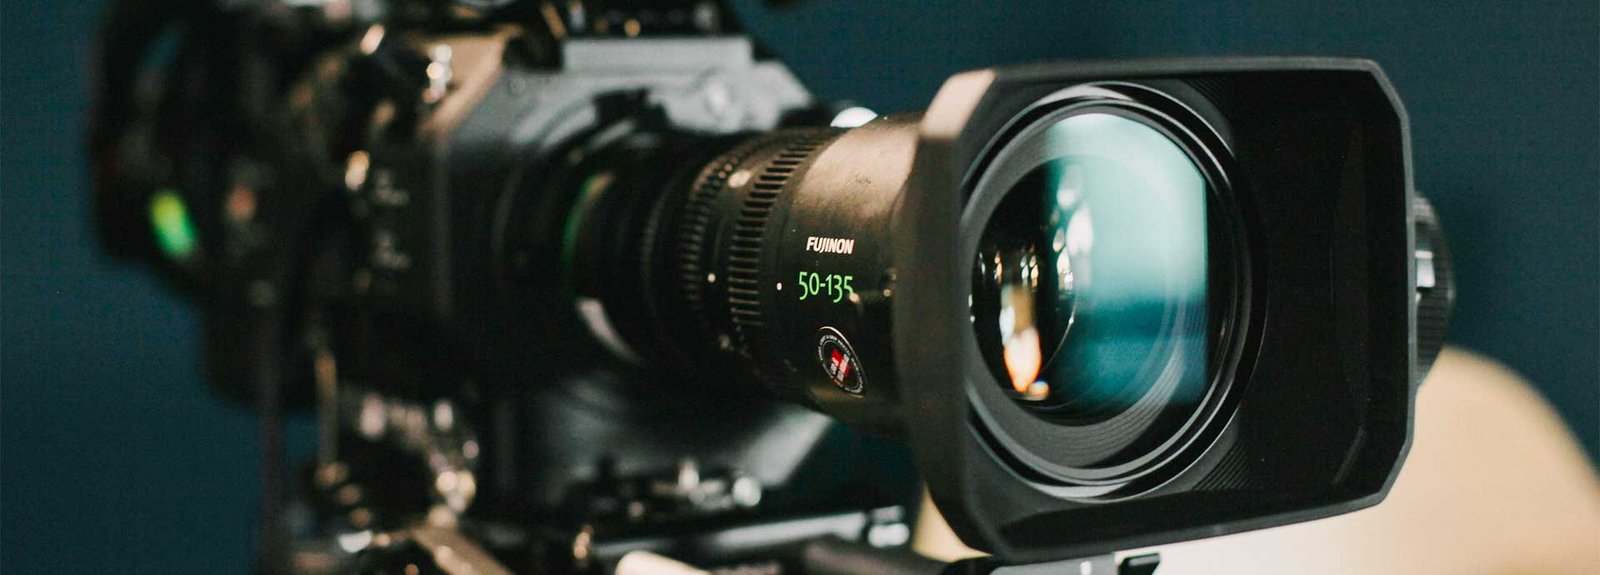 Professional video services Expert video production High-quality video content Creative video solutions Video production excellence Tailored video creation Full-service video production